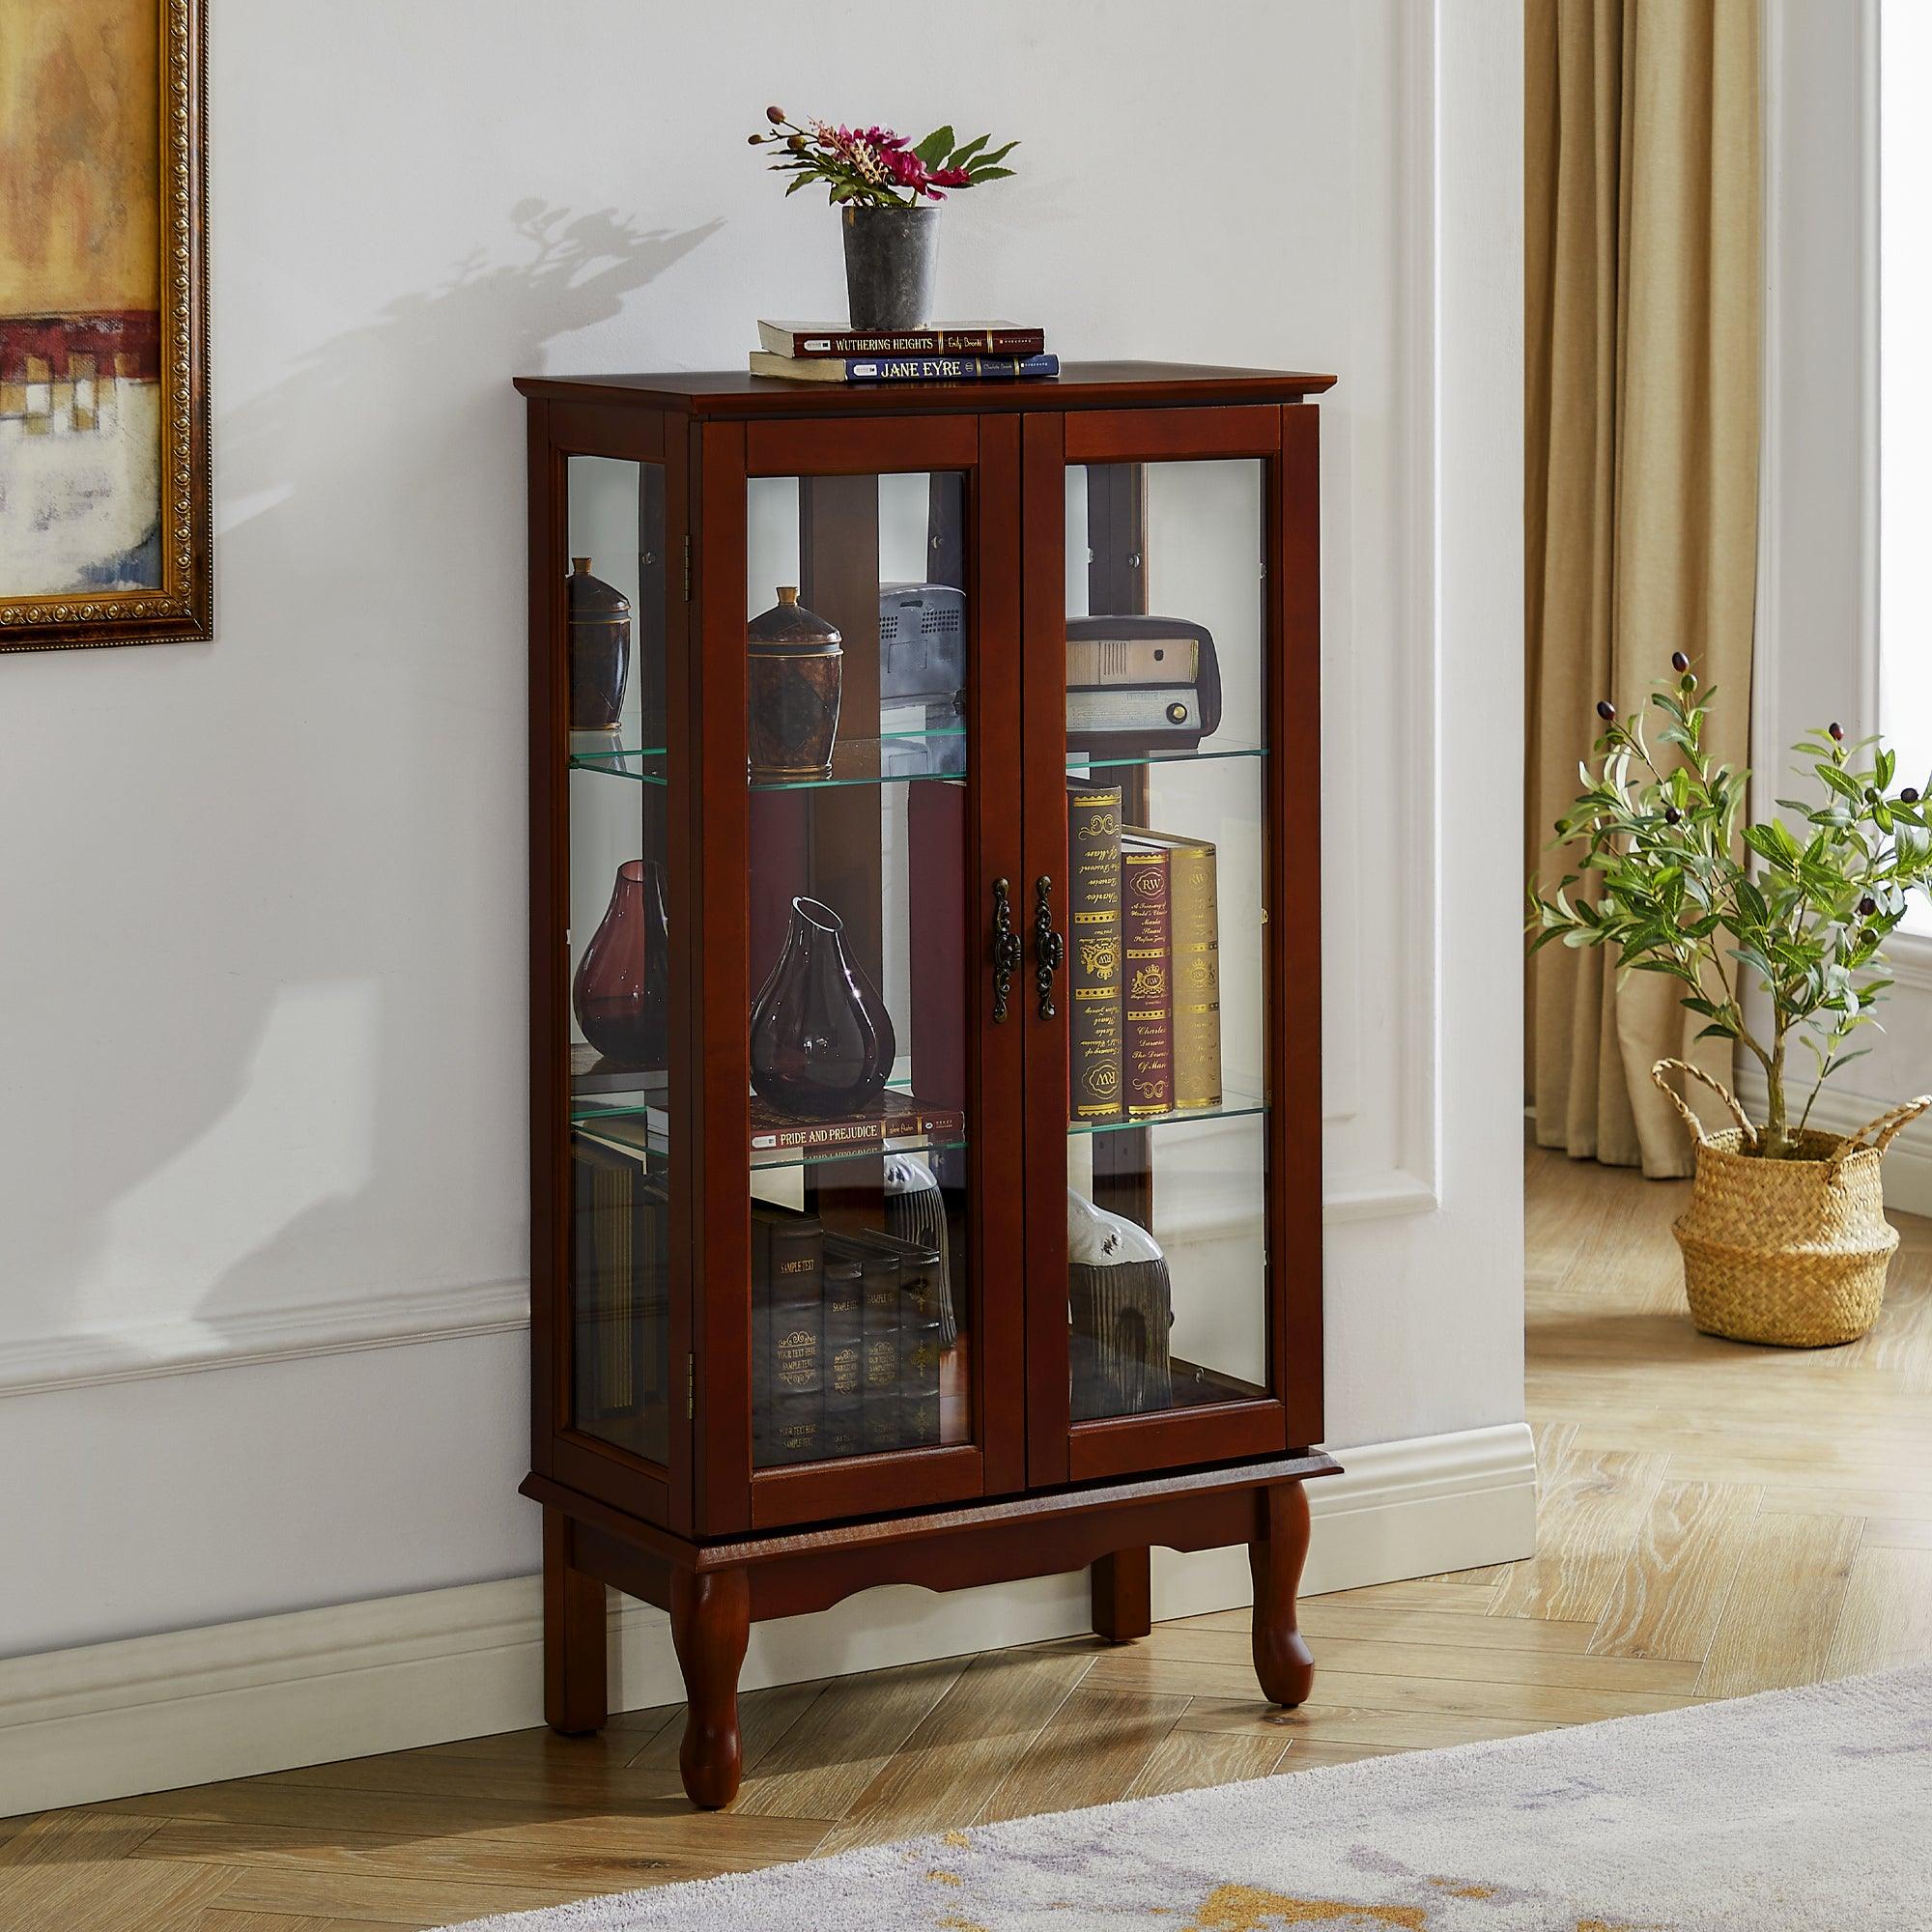 🆓🚛 3 Tier Curio Cabinet Lighted Diapaly Cabinet With Adjustable Shelves & Mirrored Back Panel, Tempered Glass Doors, Cherry, (E26 Light Bulb Not Included)